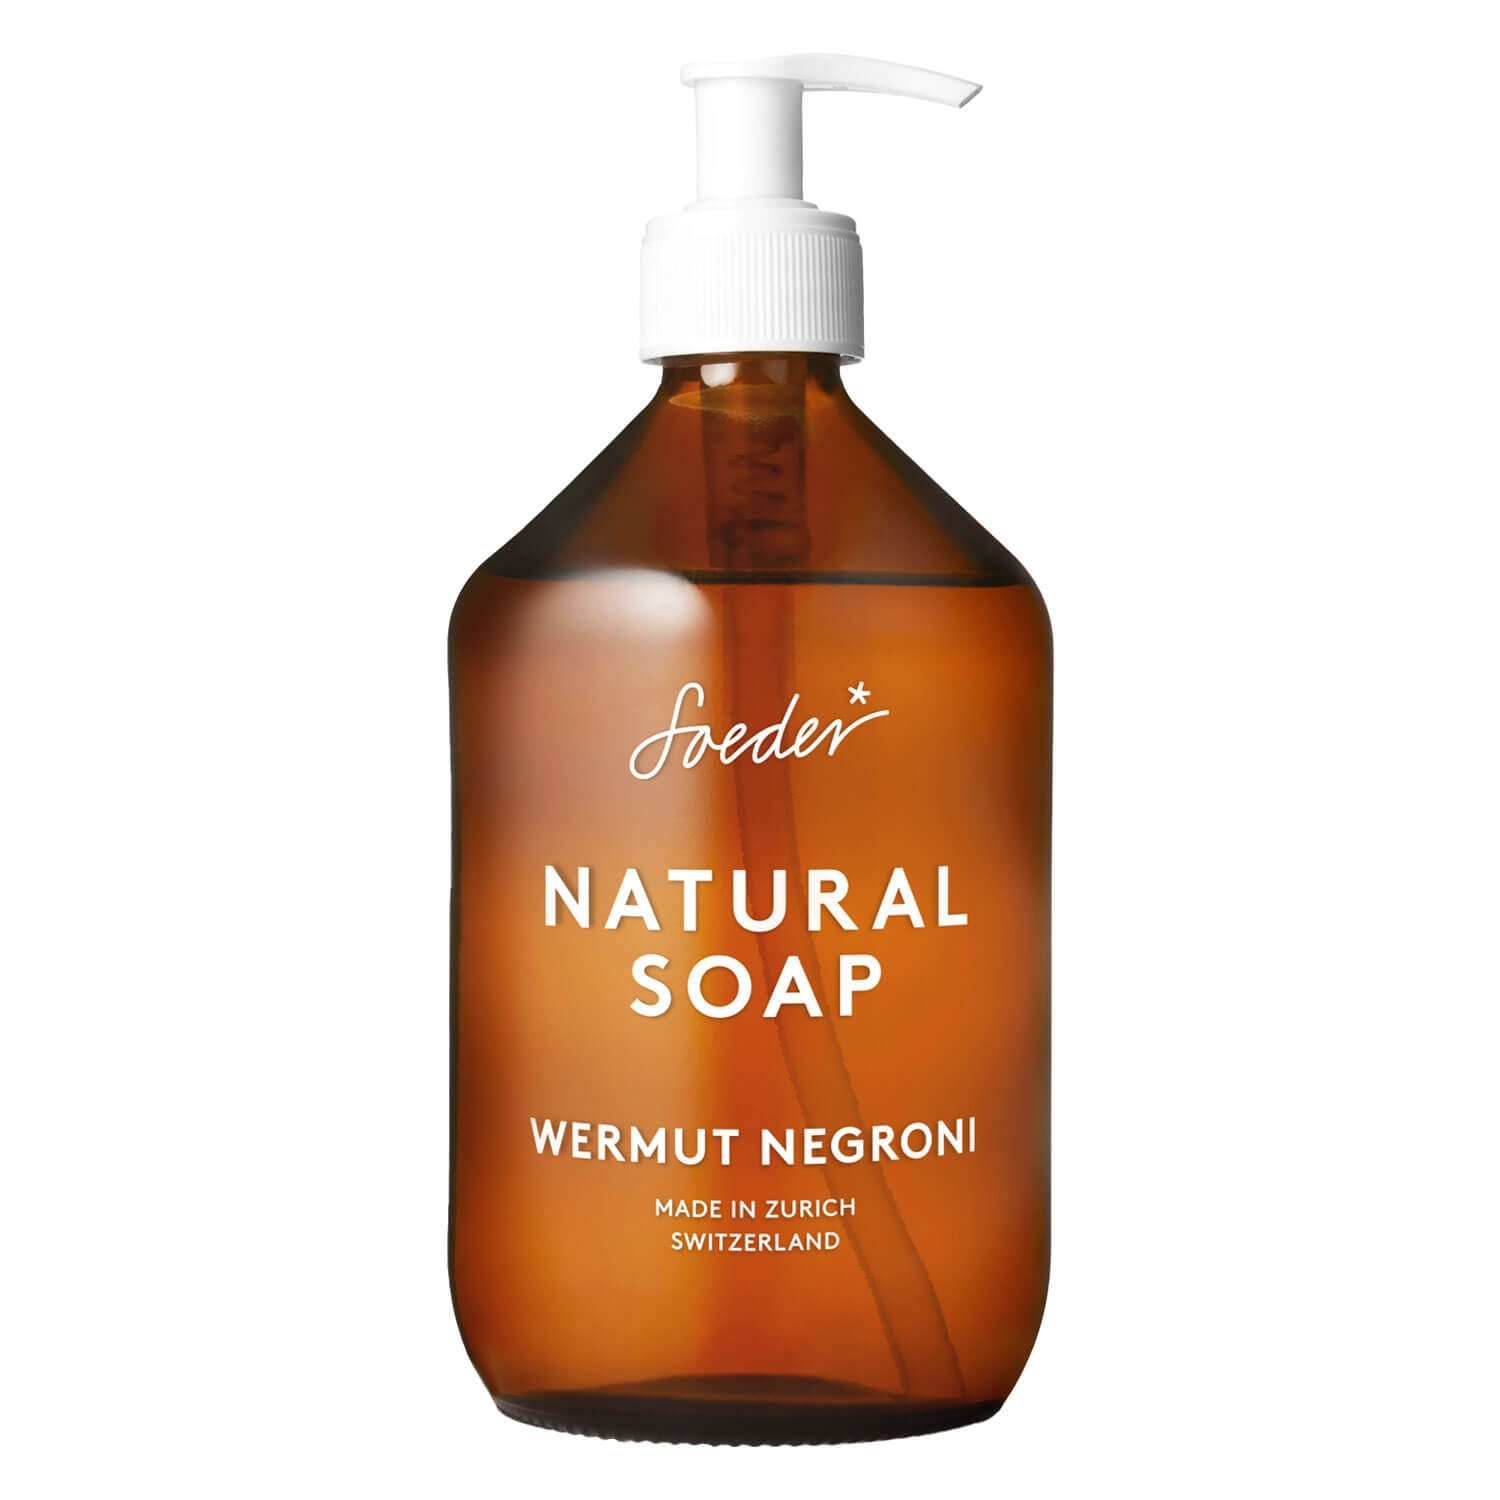 Product image from Soeder - Natural Soap Wermut Negroni